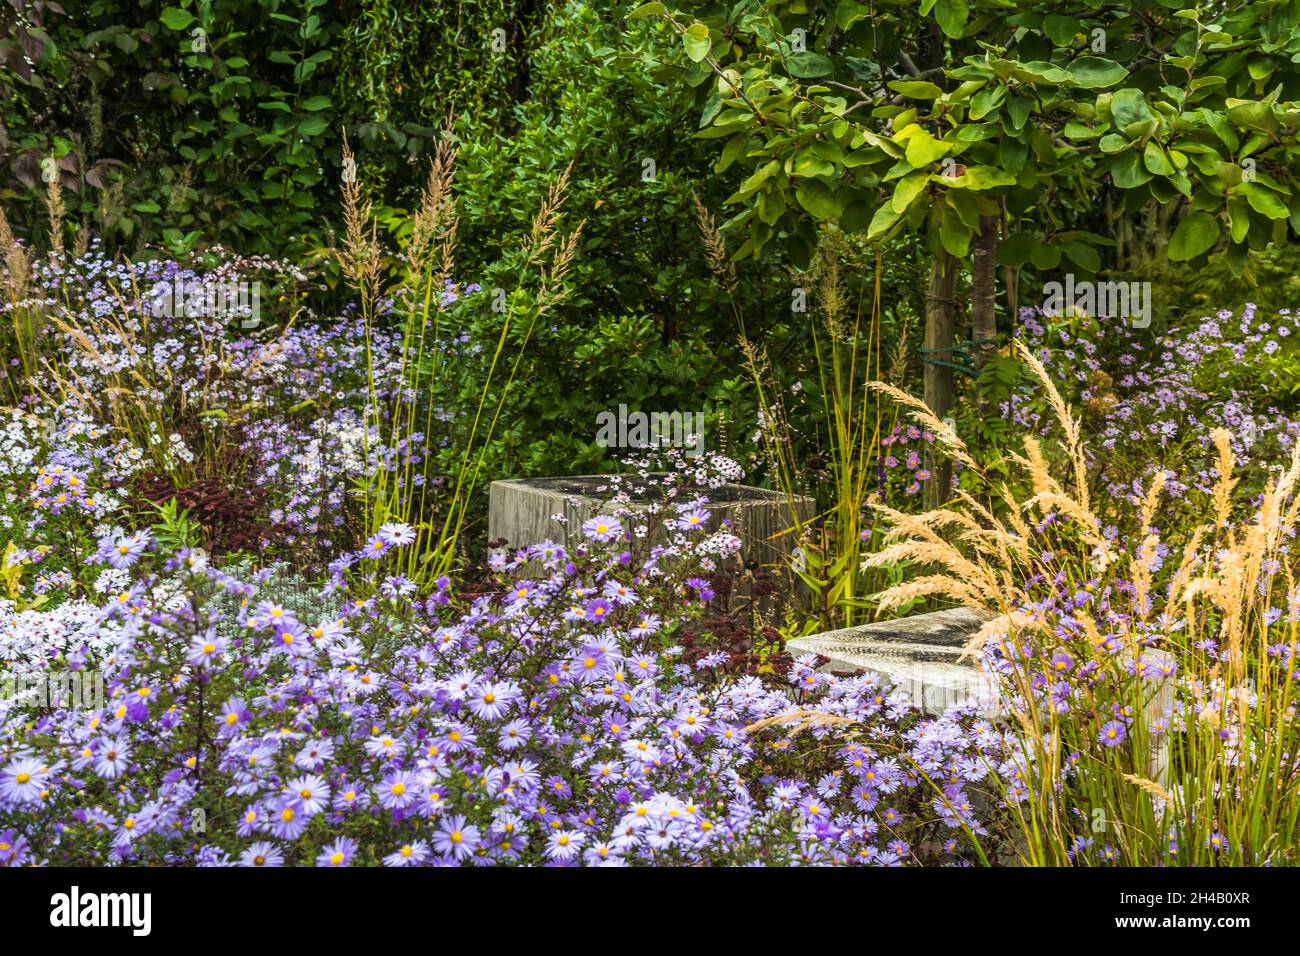 Natural garden with blooming purple autumn flowers Stock Photo